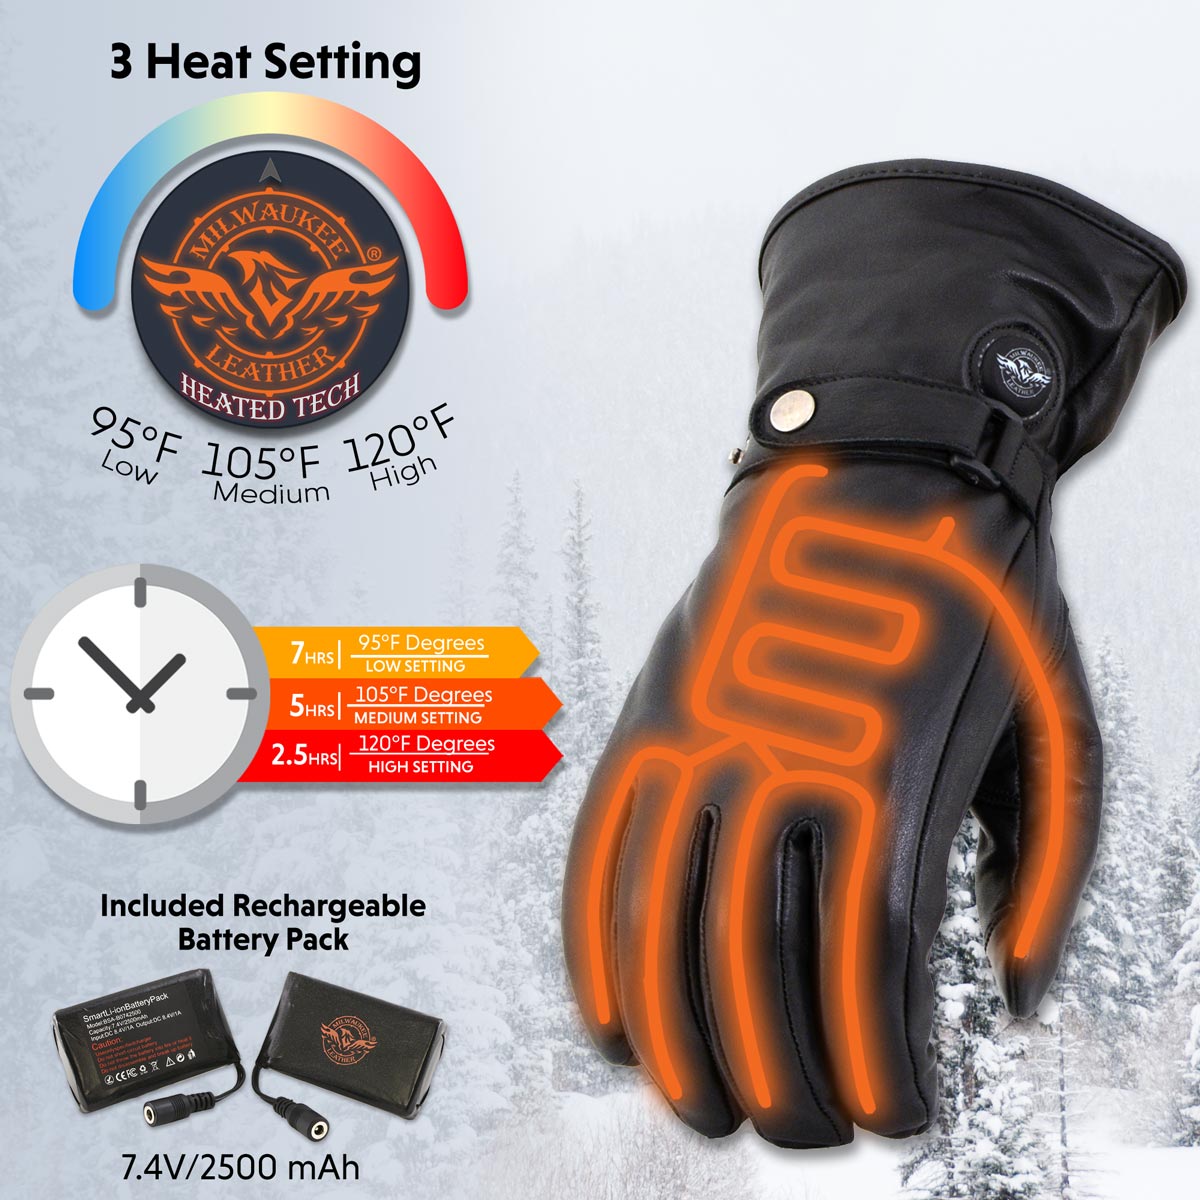 Milwaukee Leather MG7519SET Heated Gloves for Men’s Fingers Winter Glove for Motorcycle Ski Hiking w/ Battery